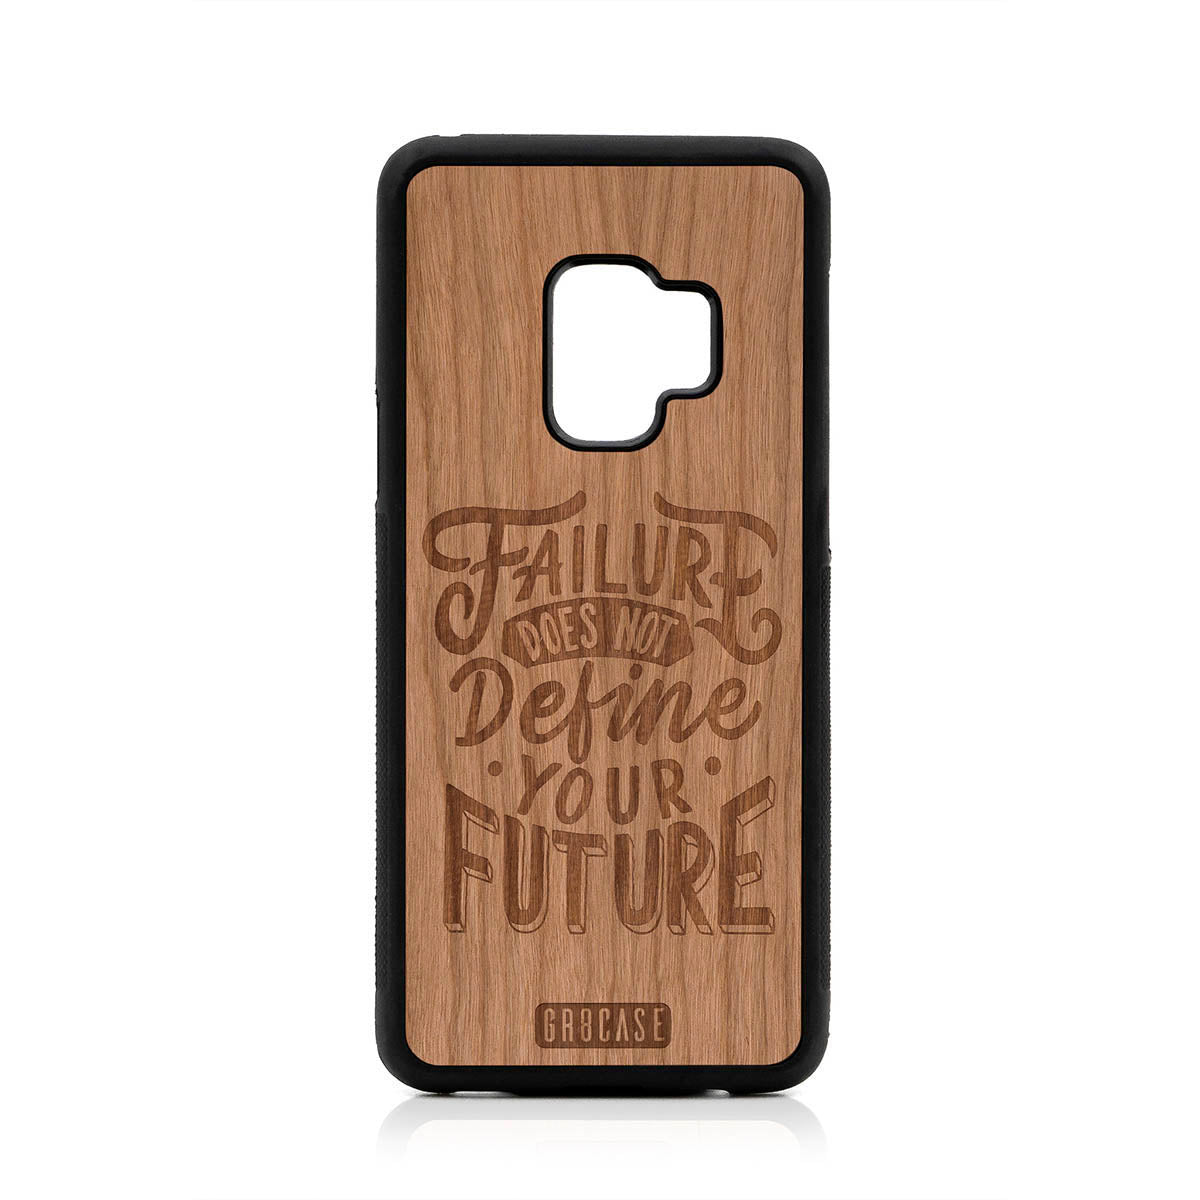 Failure Does Not Define You Future Design Wood Case For Samsung Galaxy S9 by GR8CASE